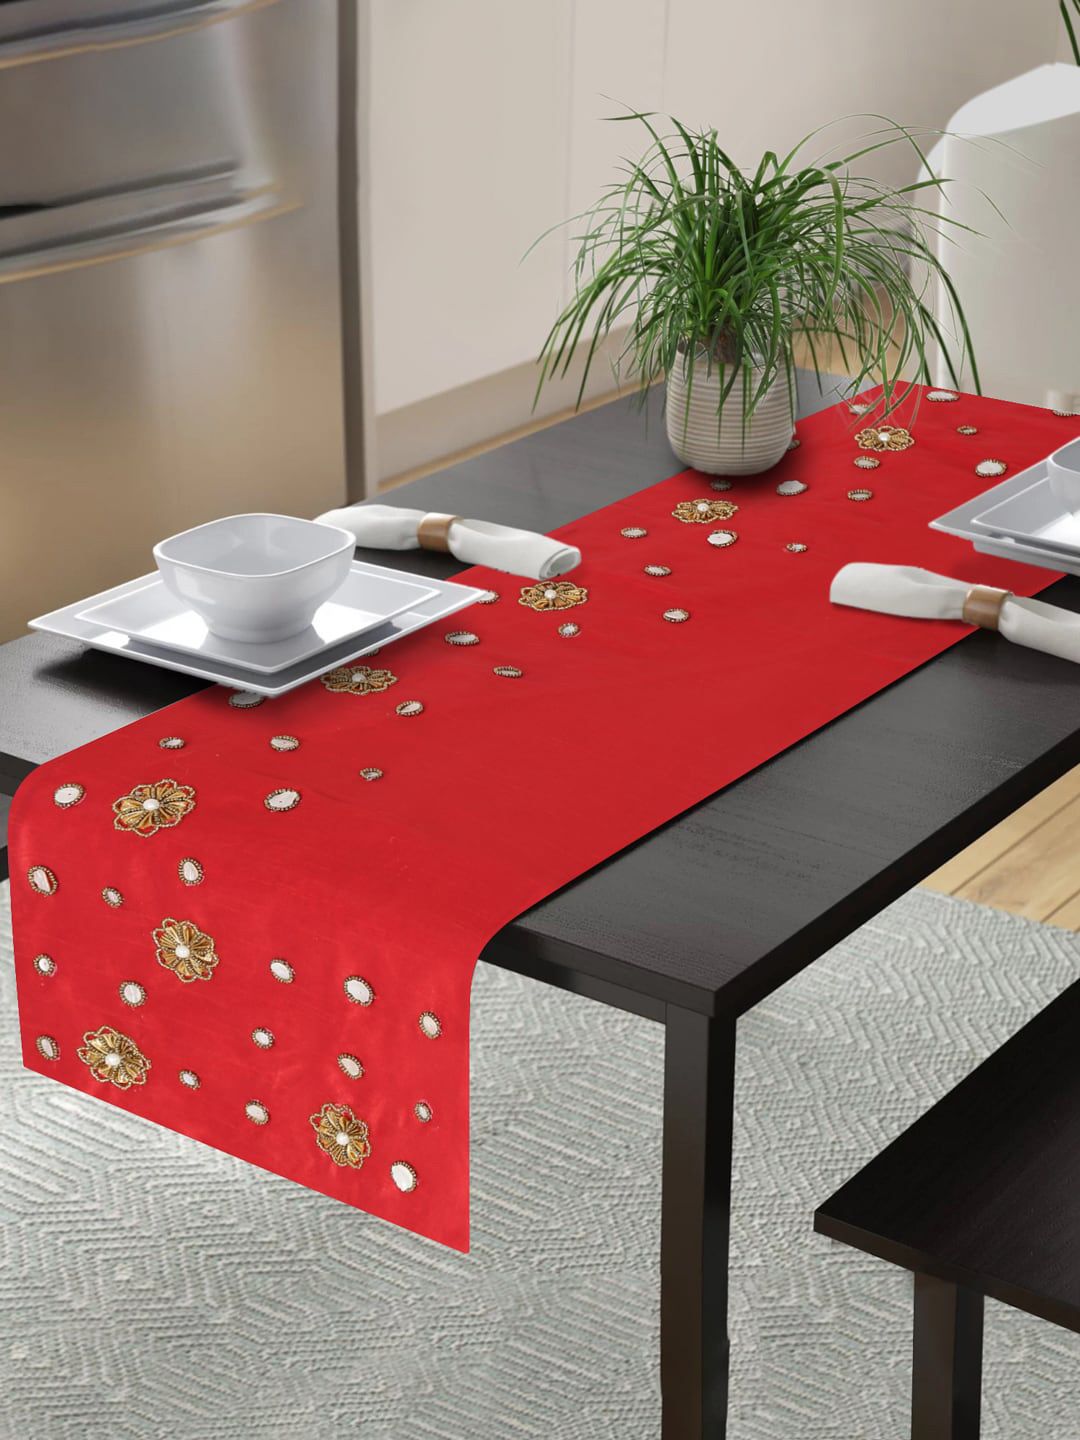 Alina decor Red & White Embroidered Table Runners Price in India